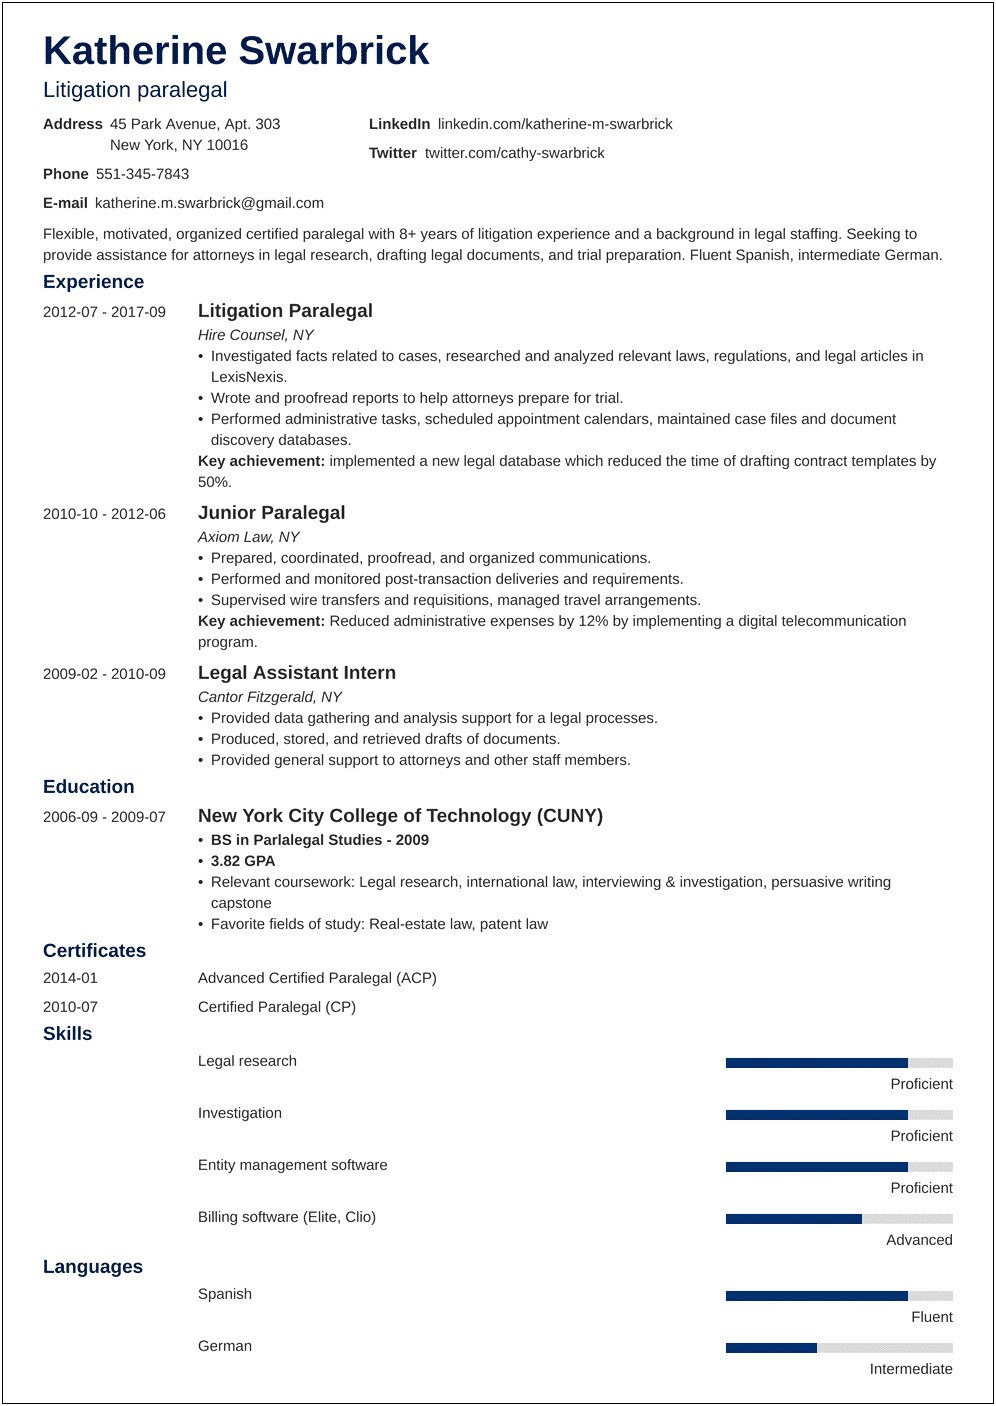 Resume Objective Entry Level Paralegal